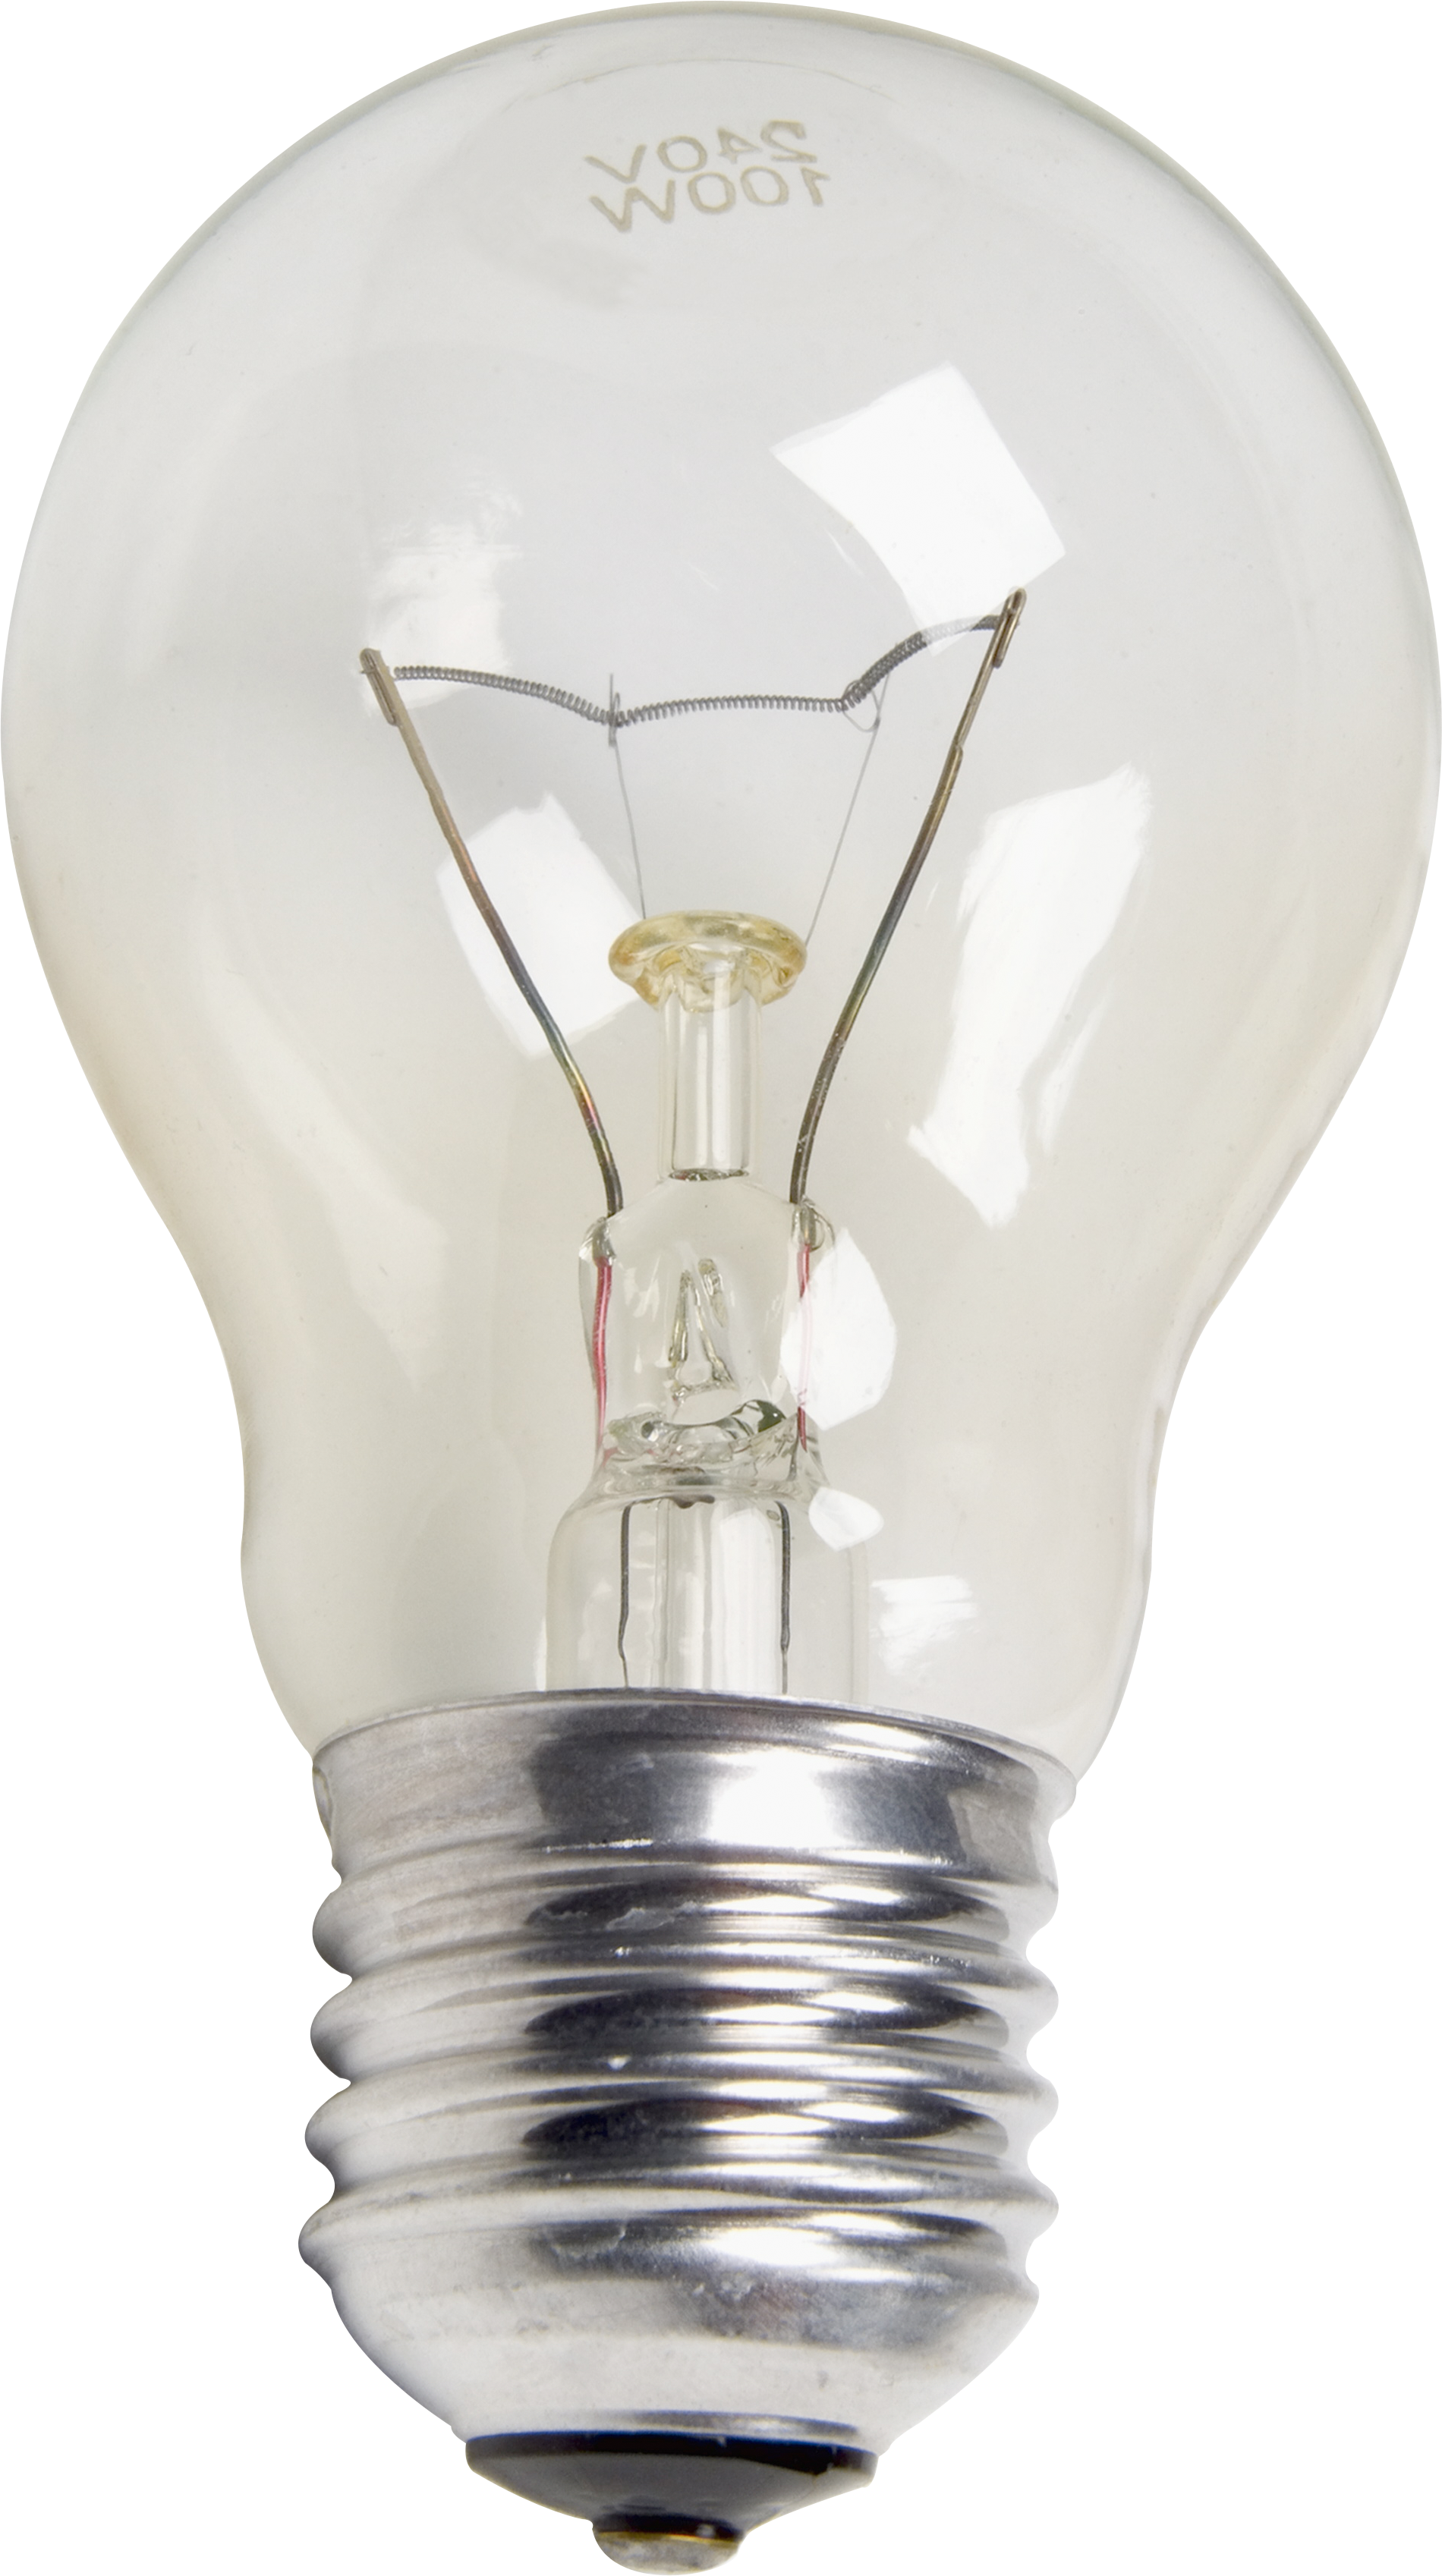 Download Lamp Png Image For Free